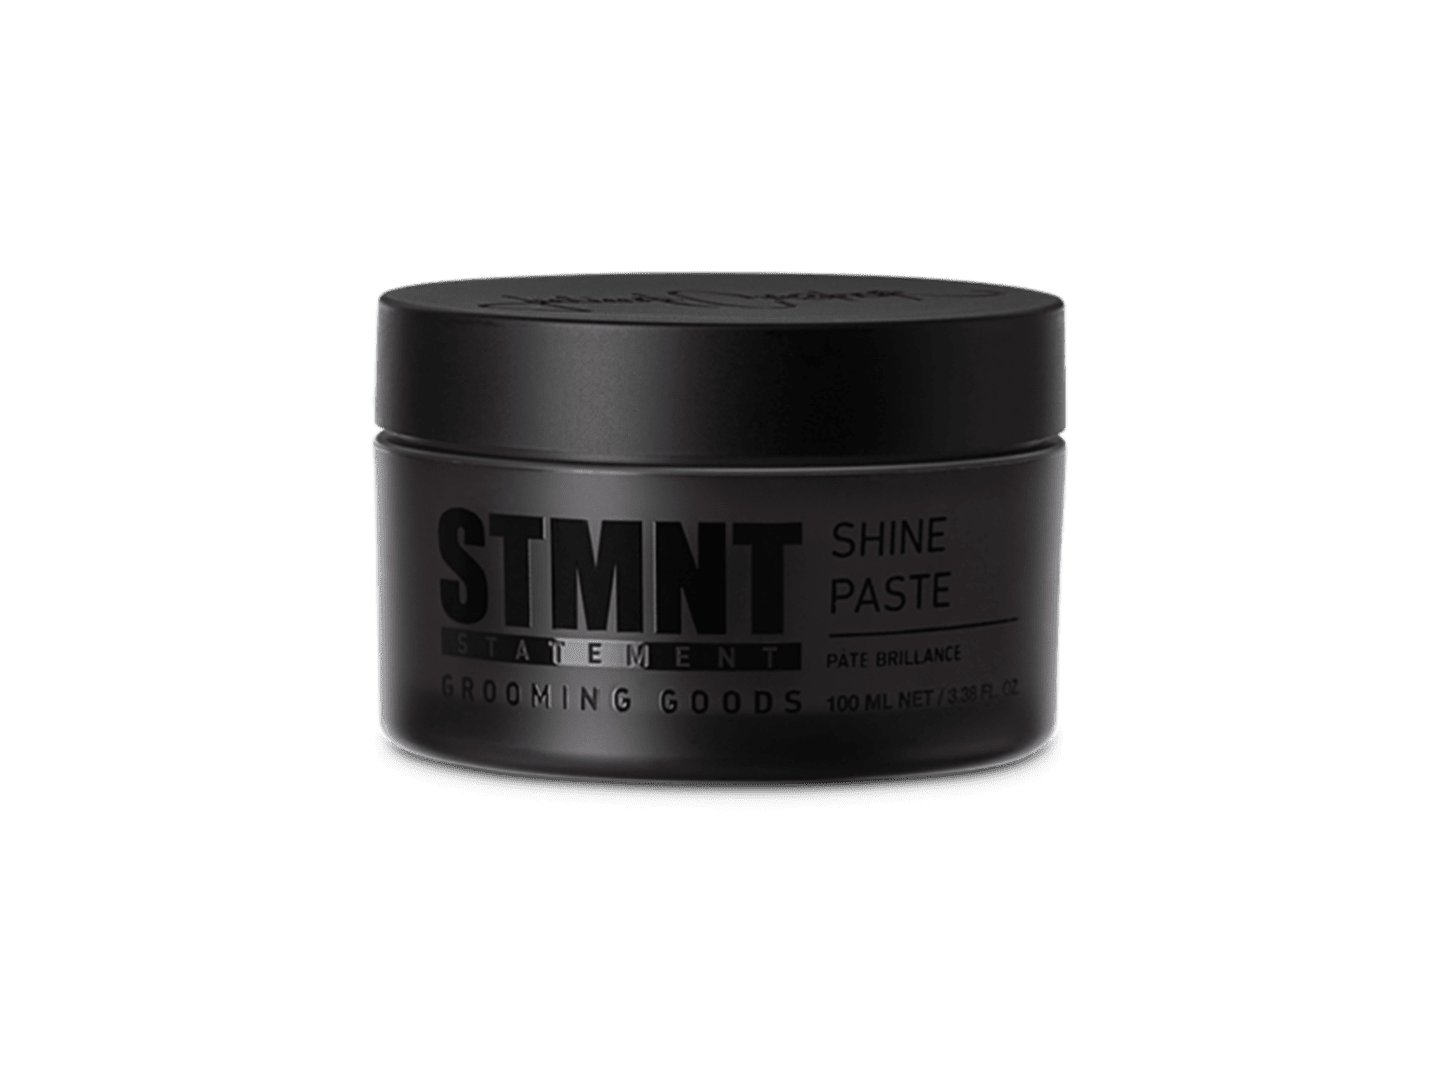 Load image into Gallery viewer, STMNT Shine Paste, 3.38 oz.
